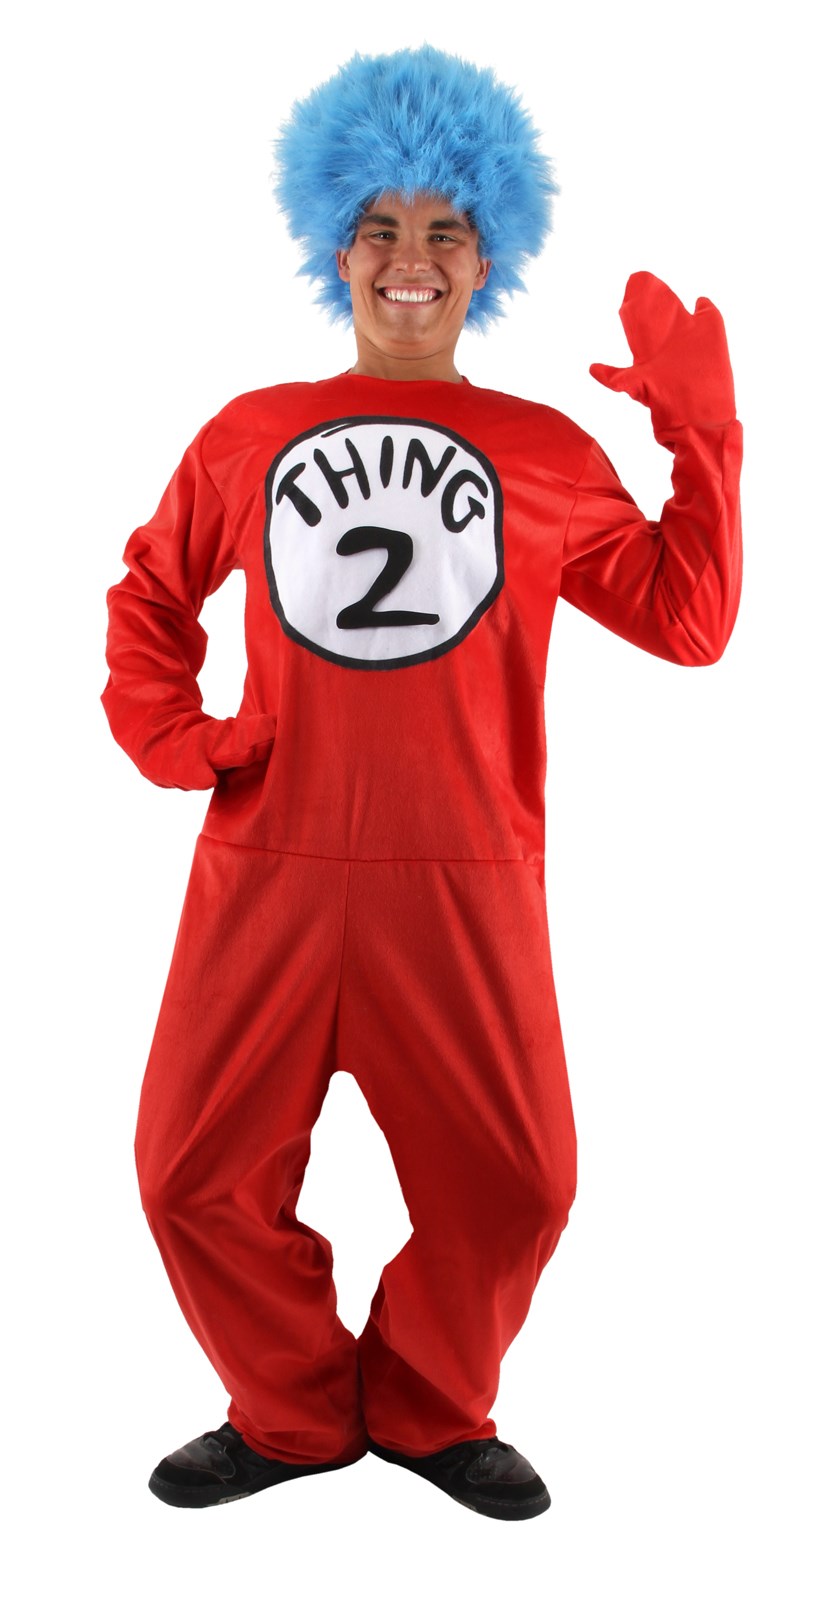 Dr. Seuss The Cat in the Hat - Thing 1 or Thing 2 Adult Costume